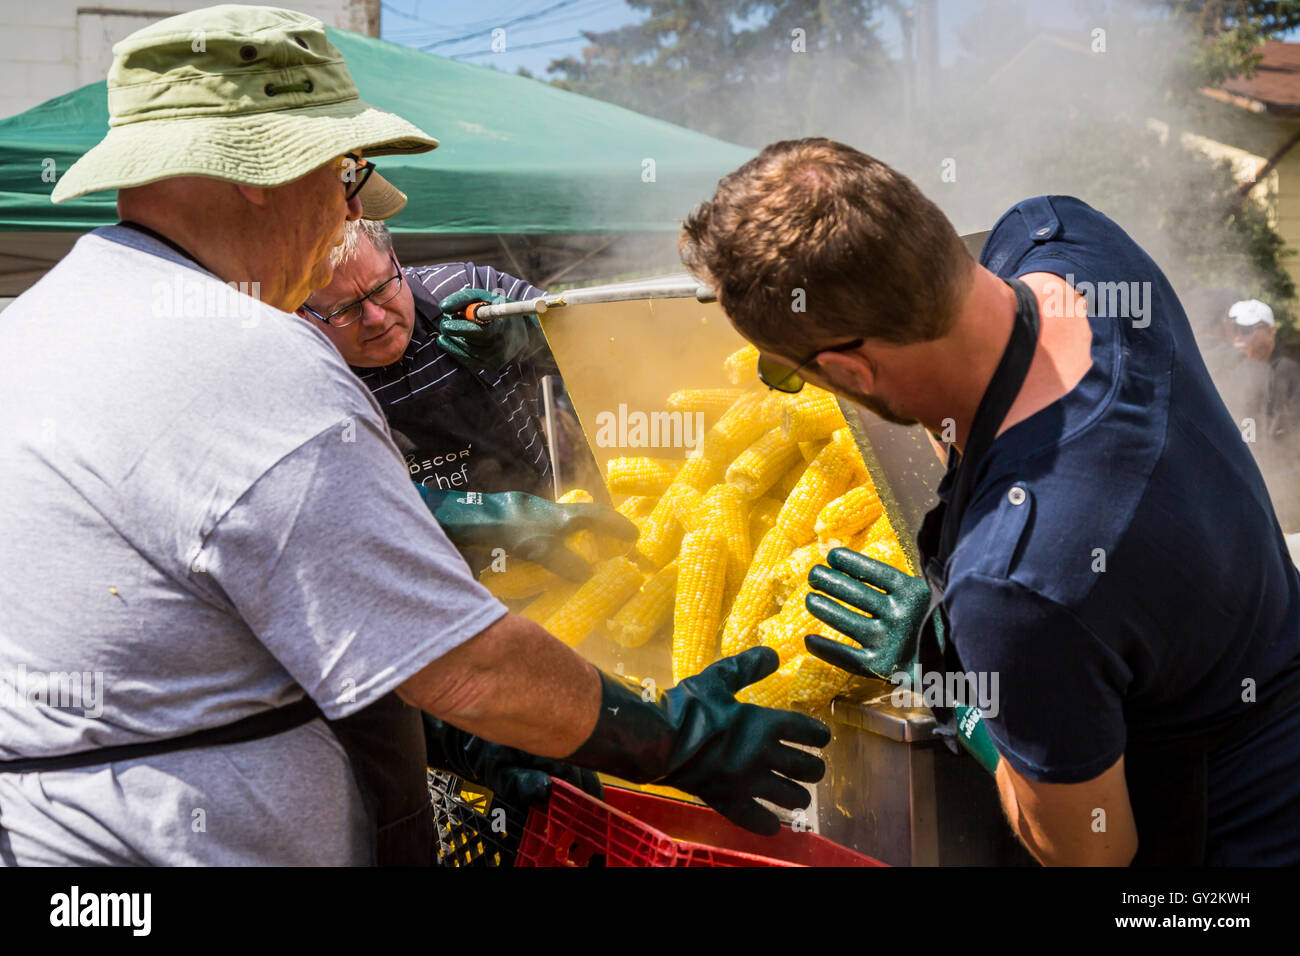 Boiling free corn on the cob at the Corn and Apple Festival in Morden, Manitoba, Canada. Stock Photo